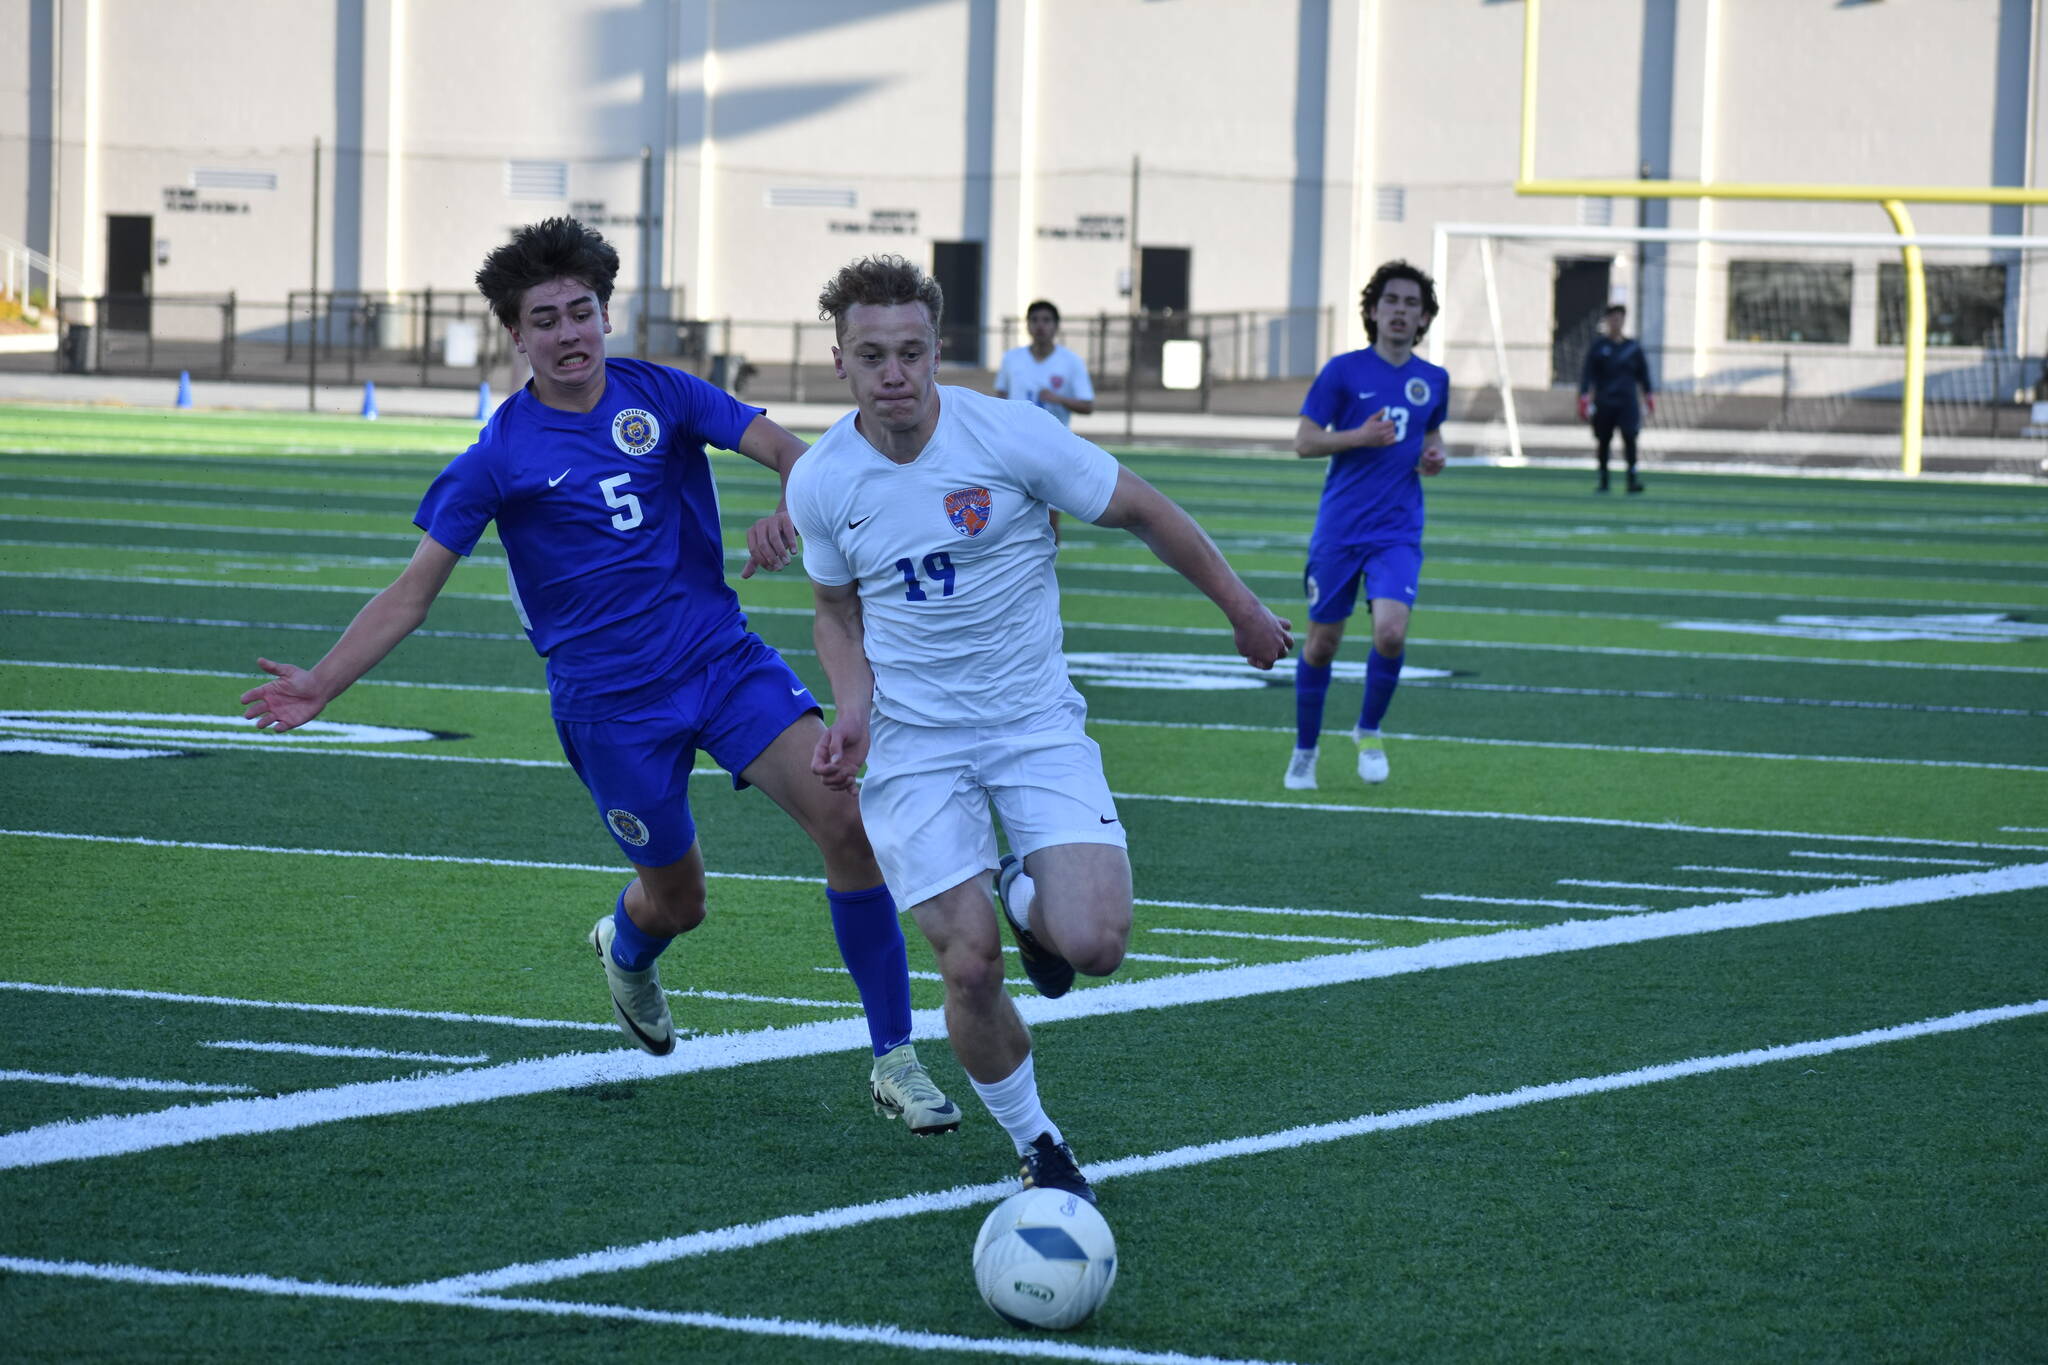 Davyd Fedina chases down the ball at Federal Way Memorial Field against Stadium. Ben Ray / The Reporter